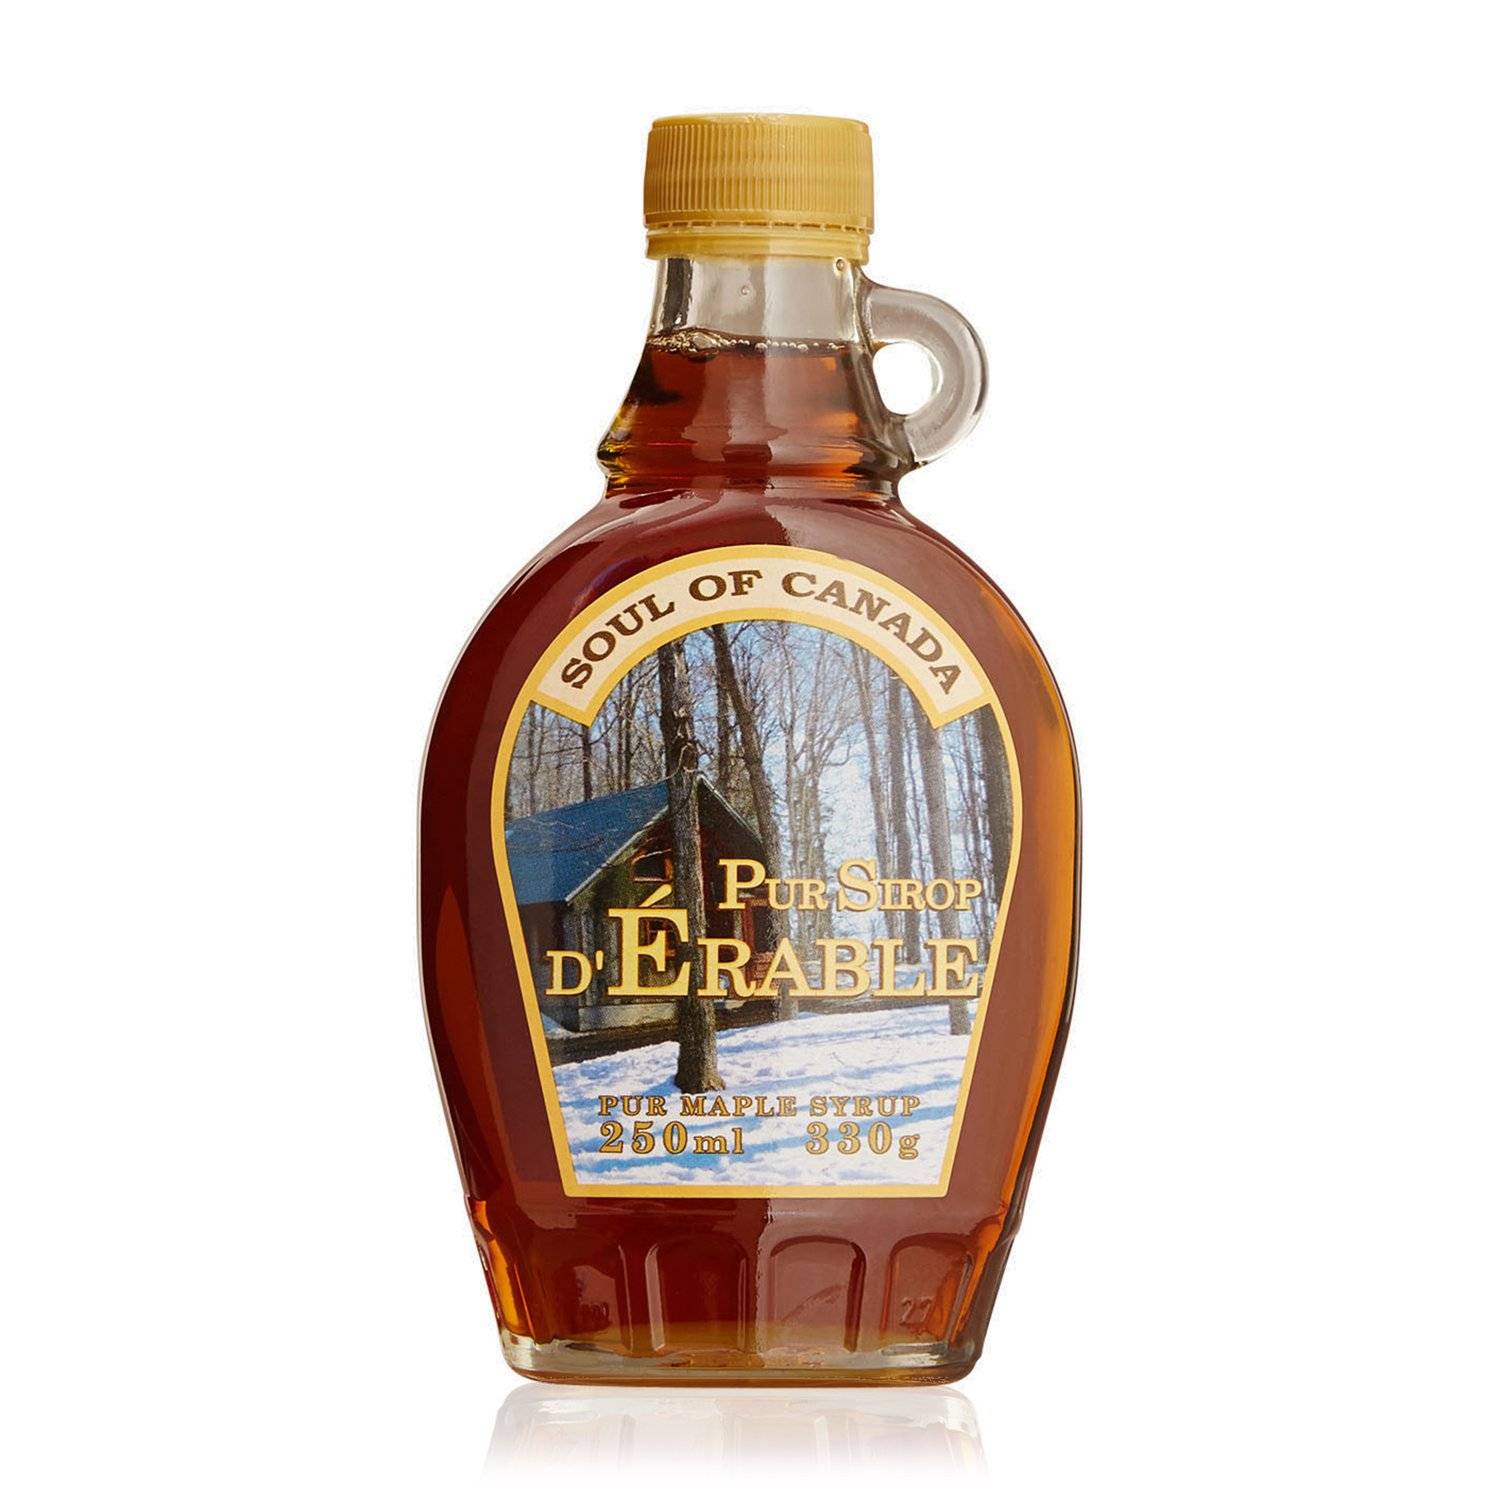 Soul of Canada Pure Maple Syrup